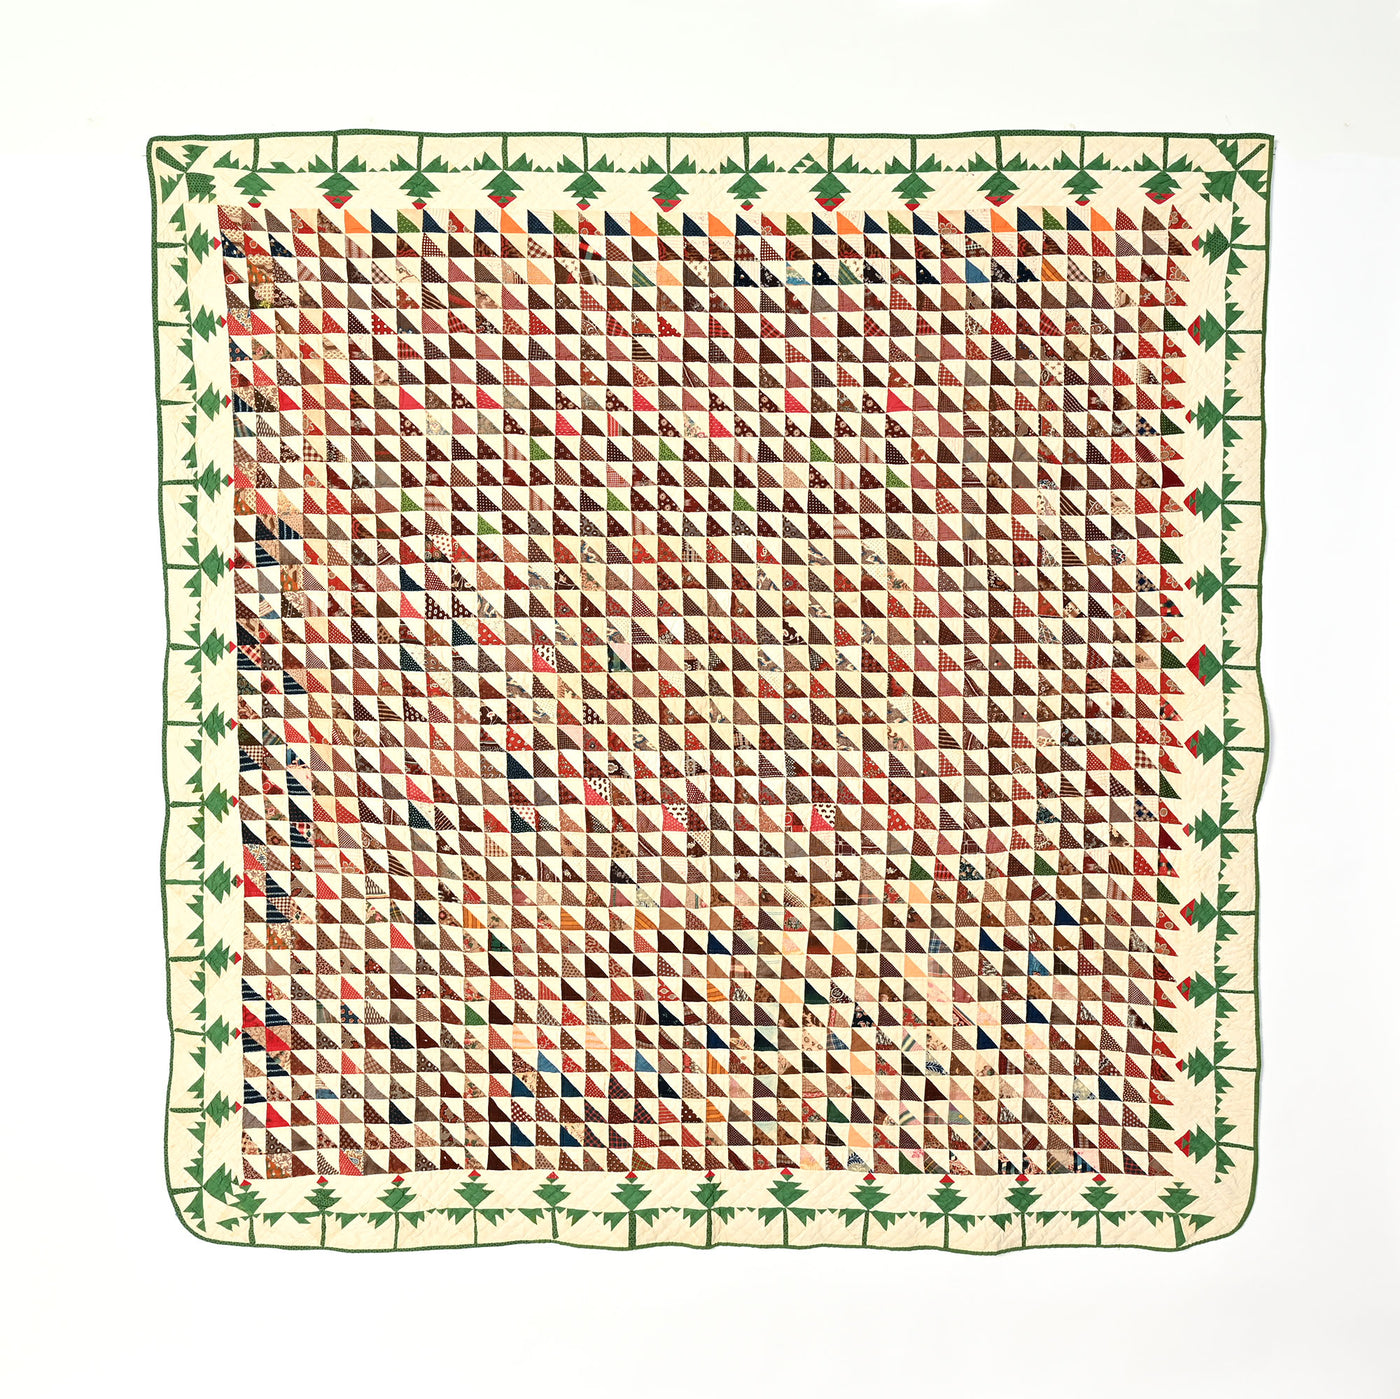 Thousand Pyramids Quilt with Lily of the Field Border; Circa 1870